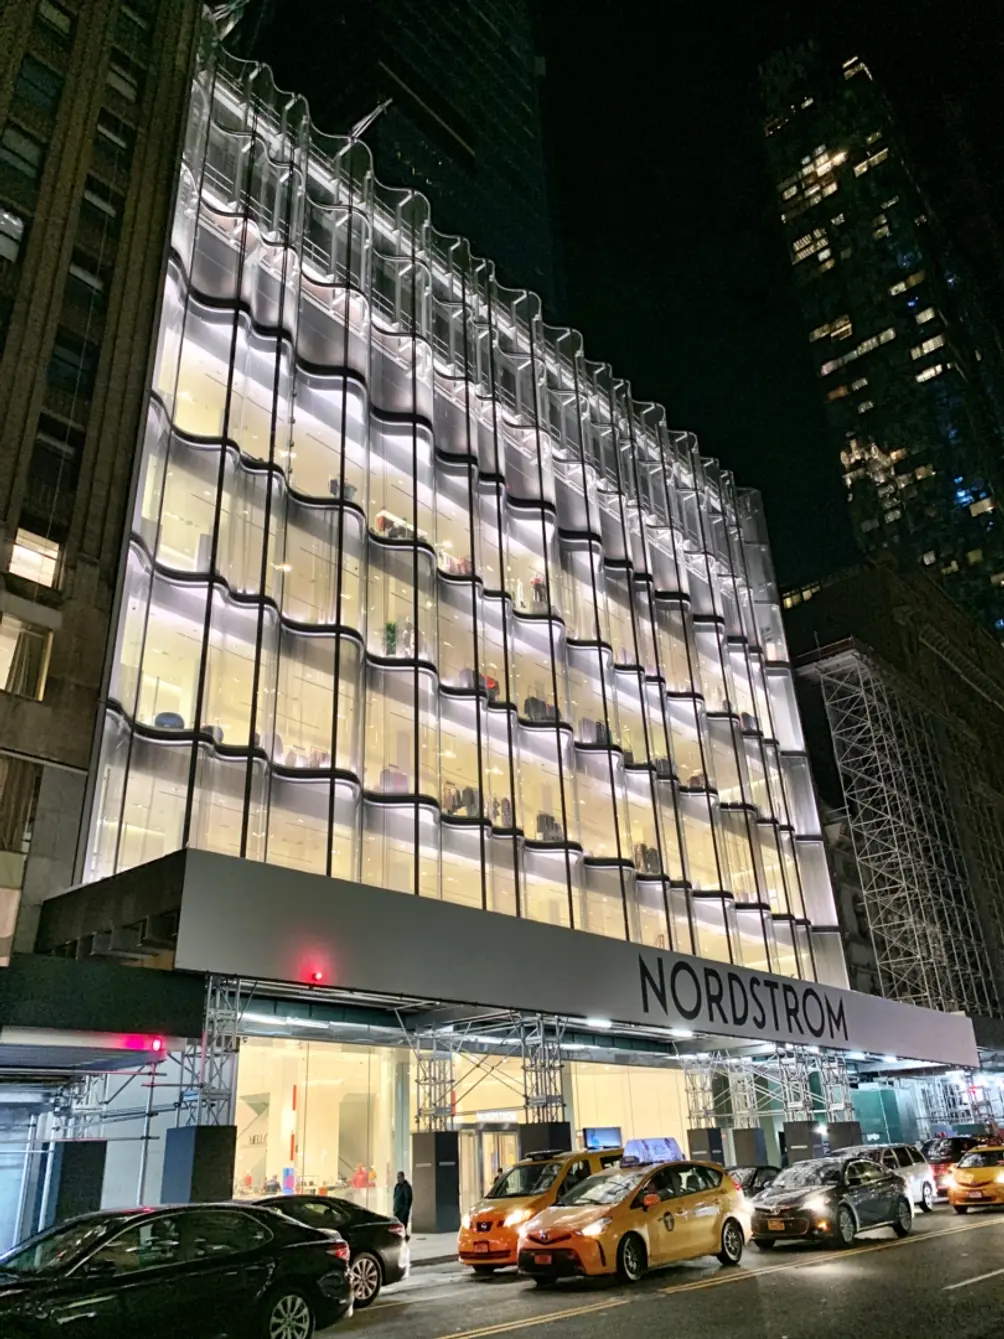 Nordstrom's NYC flagship merges open space with hidden tech